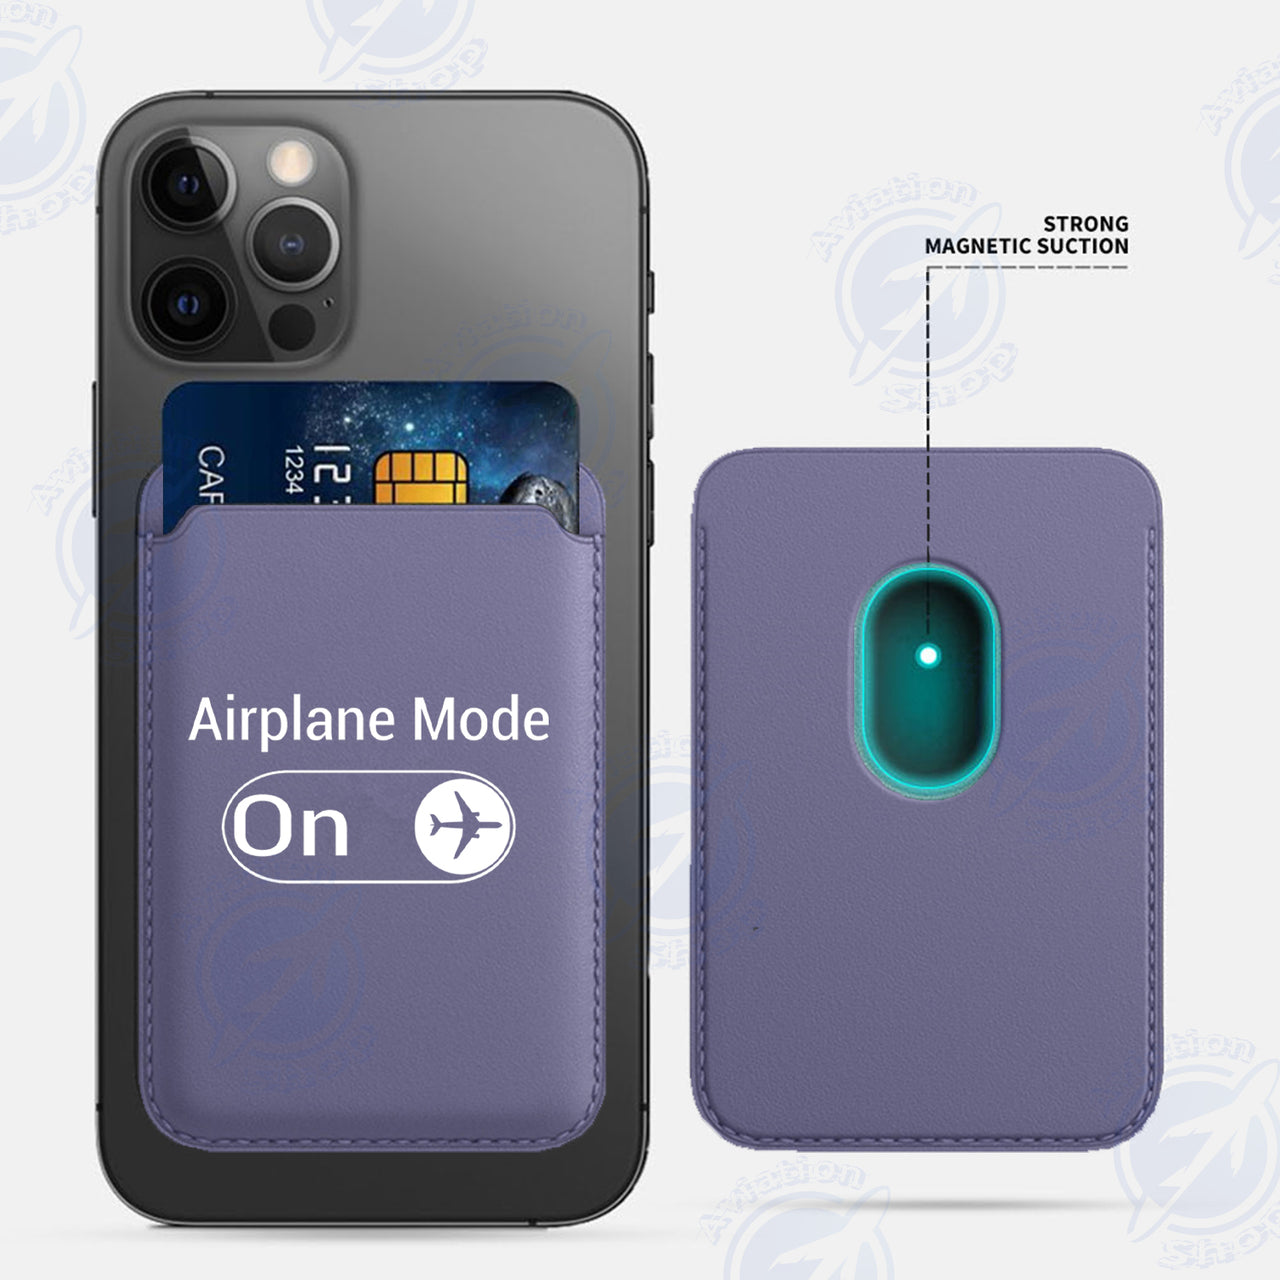 Airplane Mode On iPhone Cases Magnetic Card Wallet